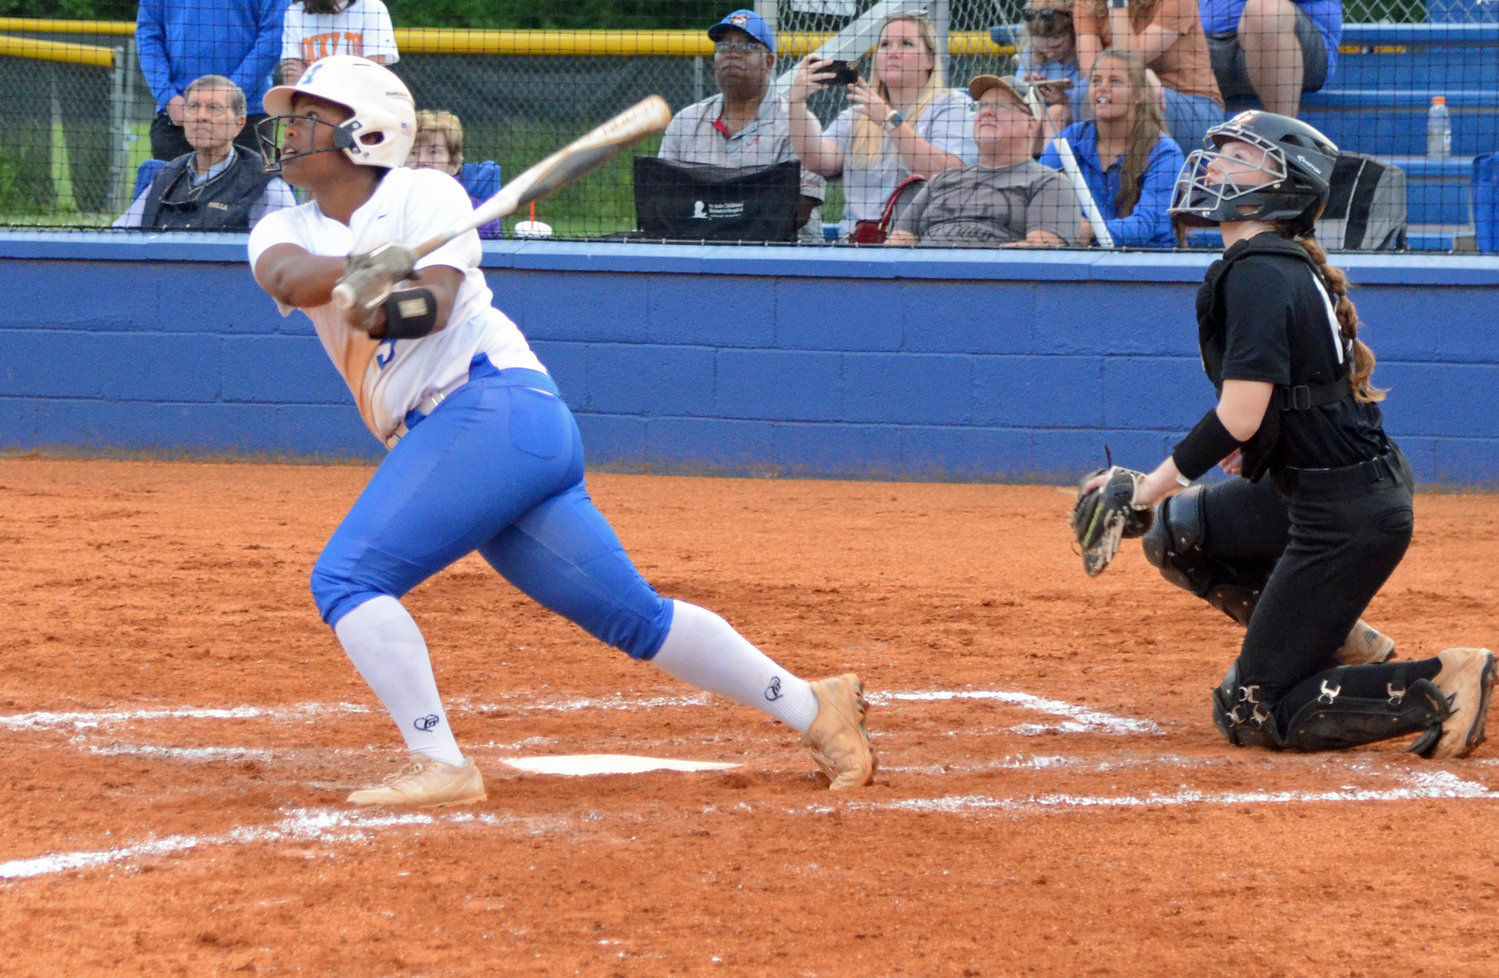 Kaniyah Taylor followed Blackman with another homerun for Marshall County.